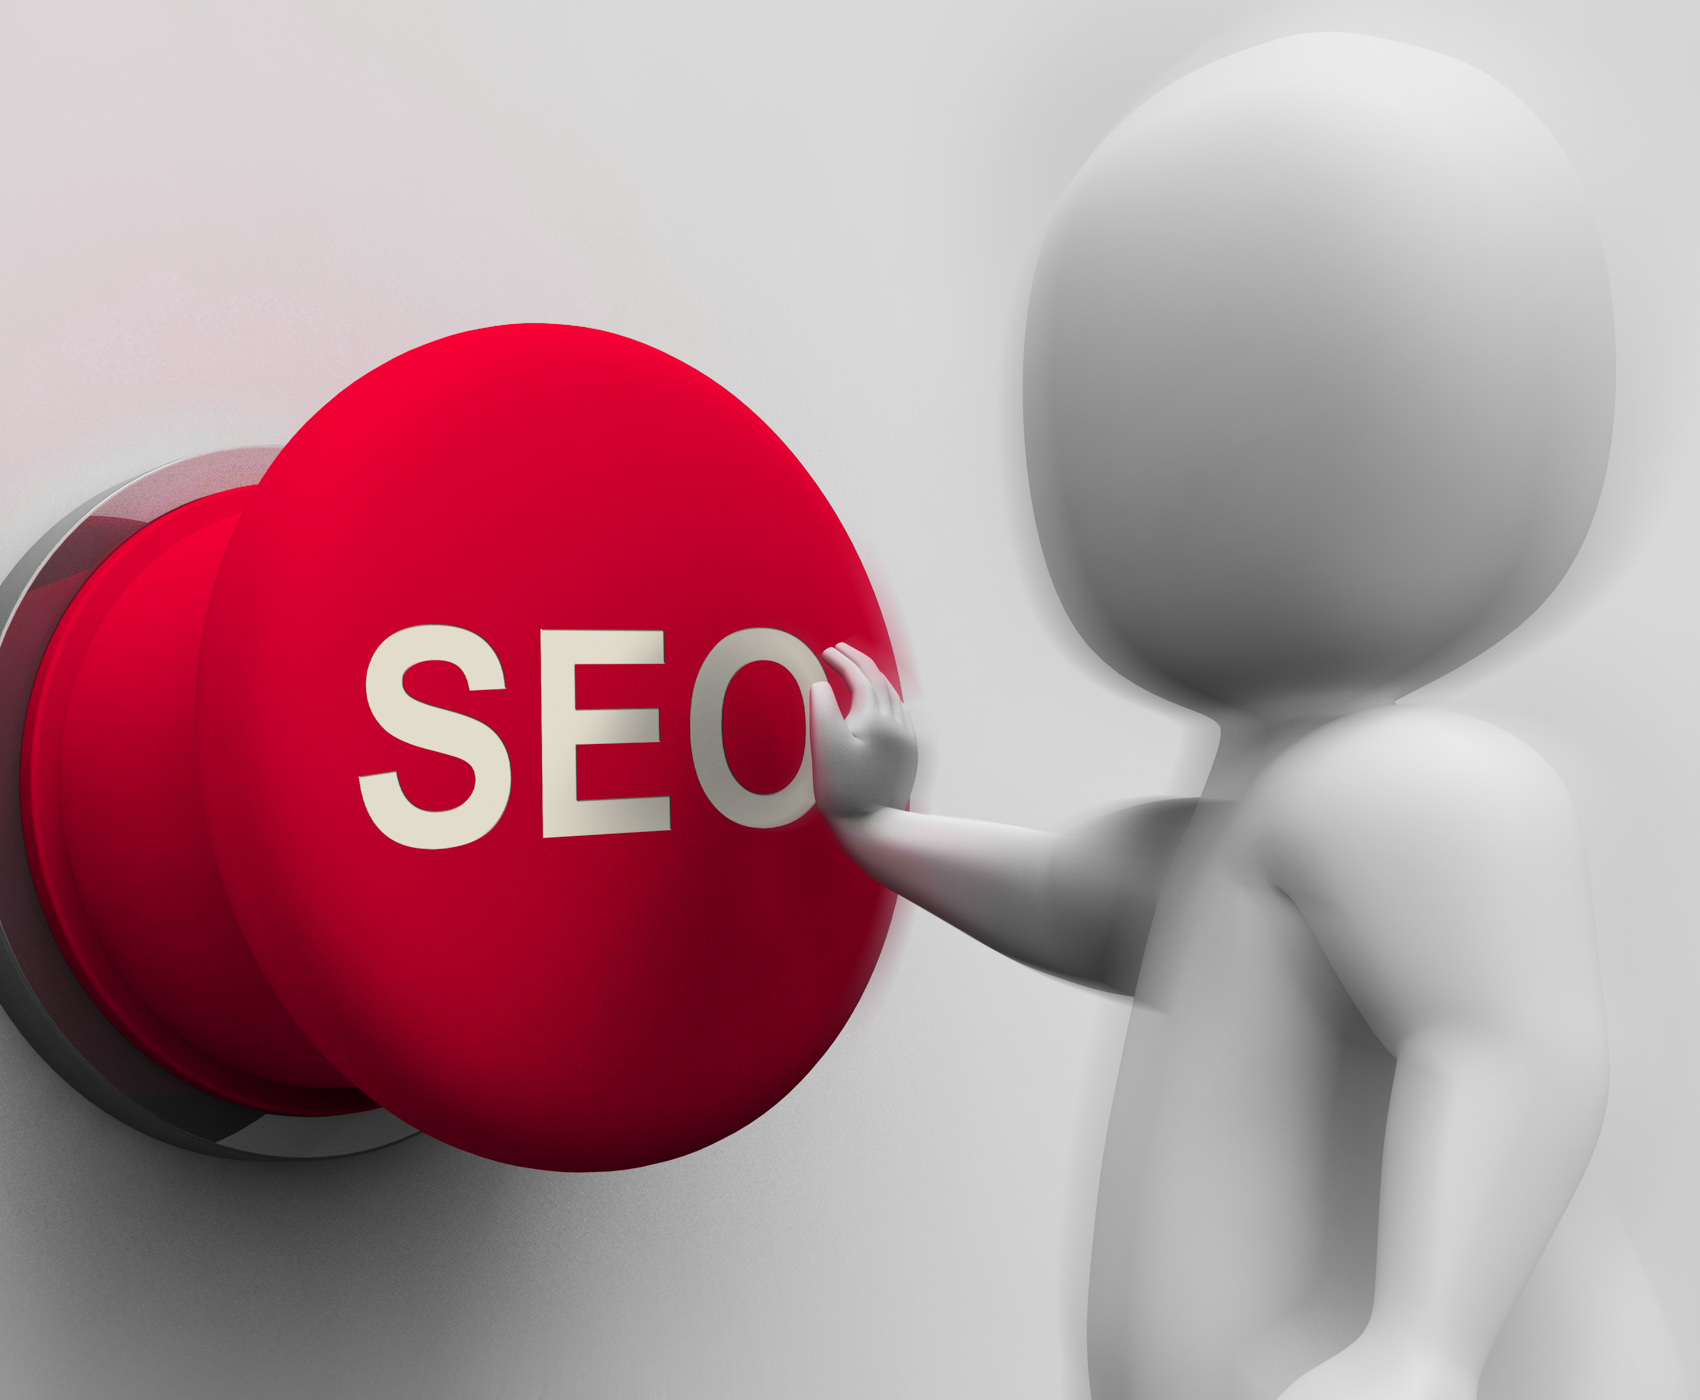 Seo pressed shows internet marketing in search results photo